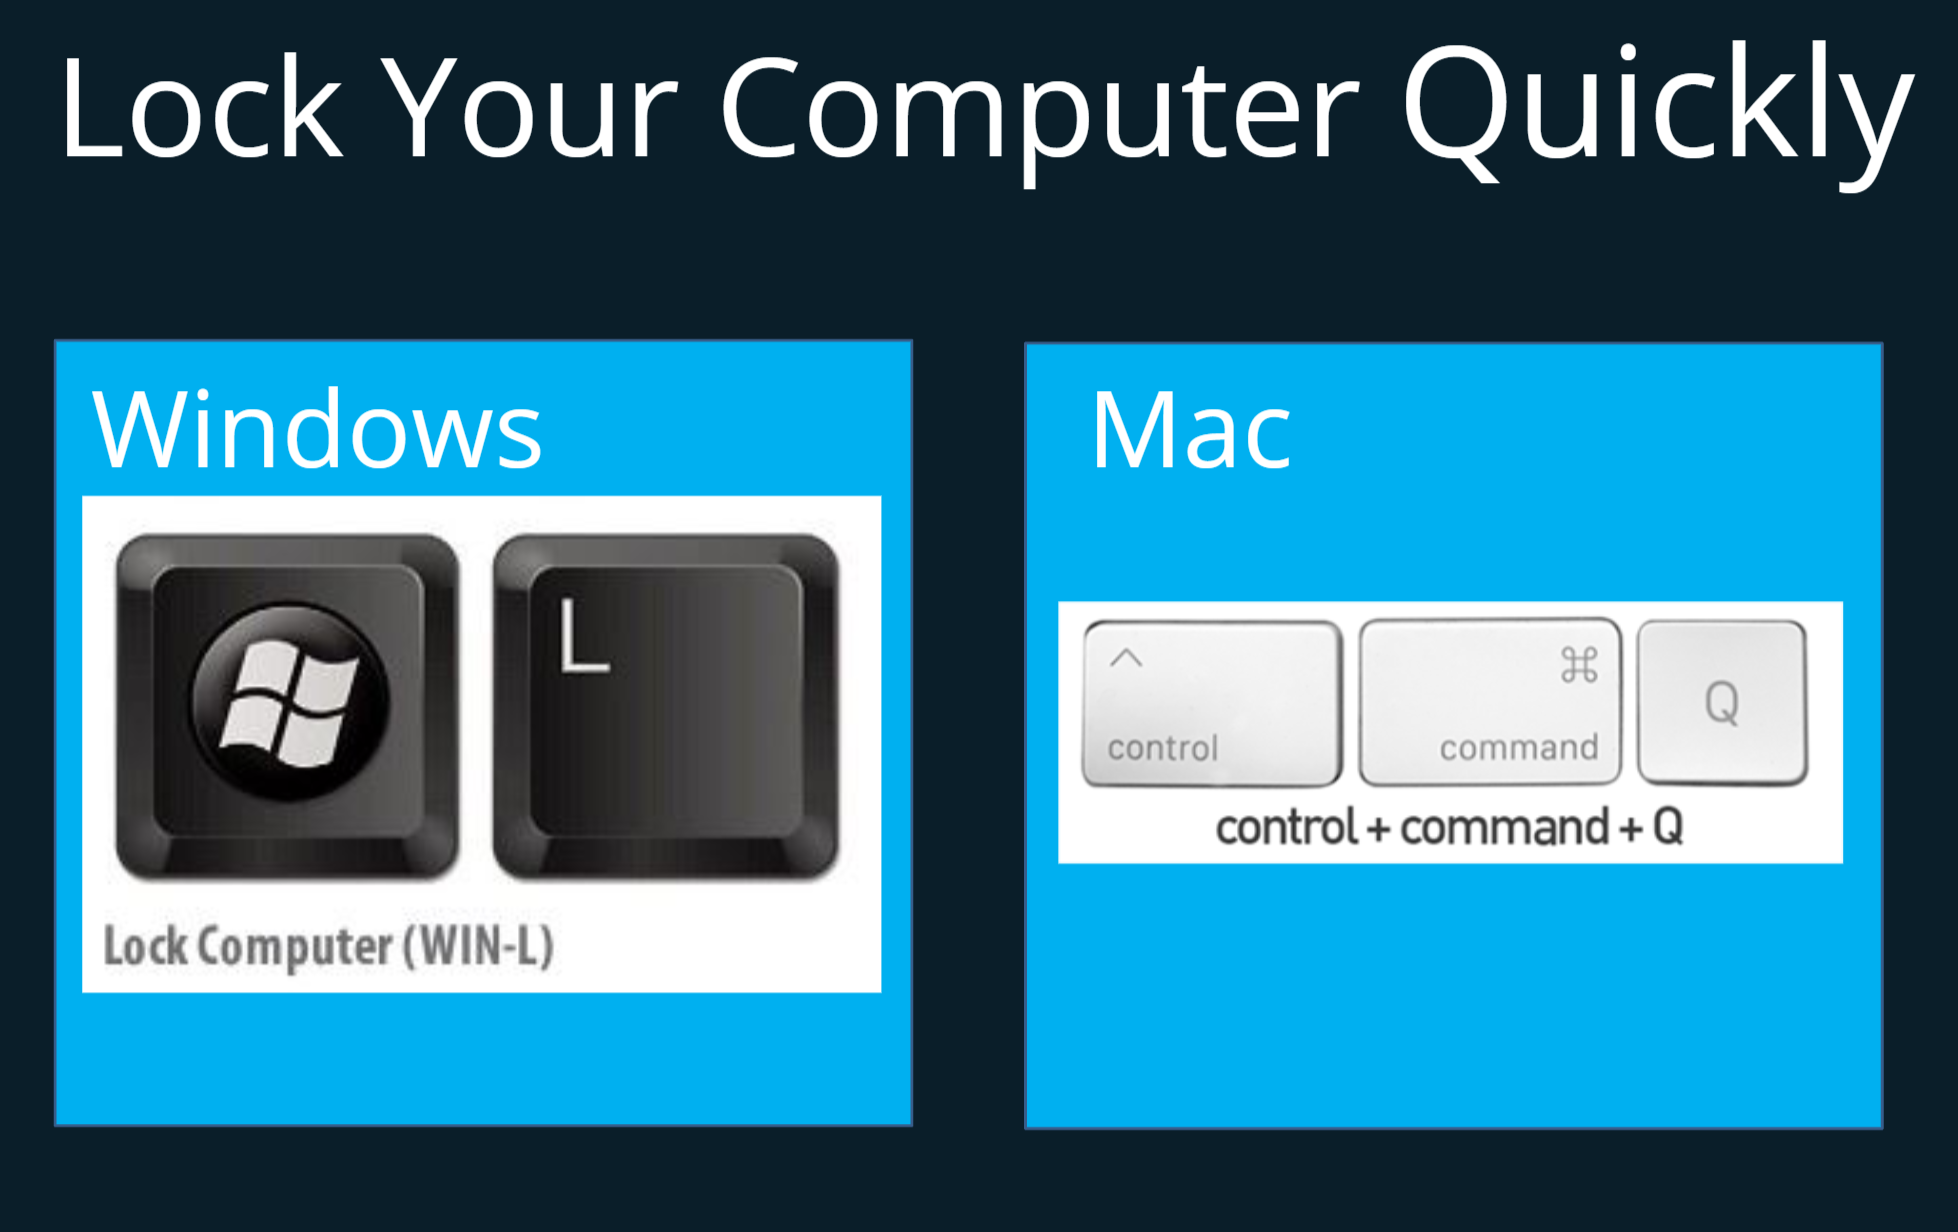 Know your keyboard shortcuts: Win+L or CTRL+CMD+Q